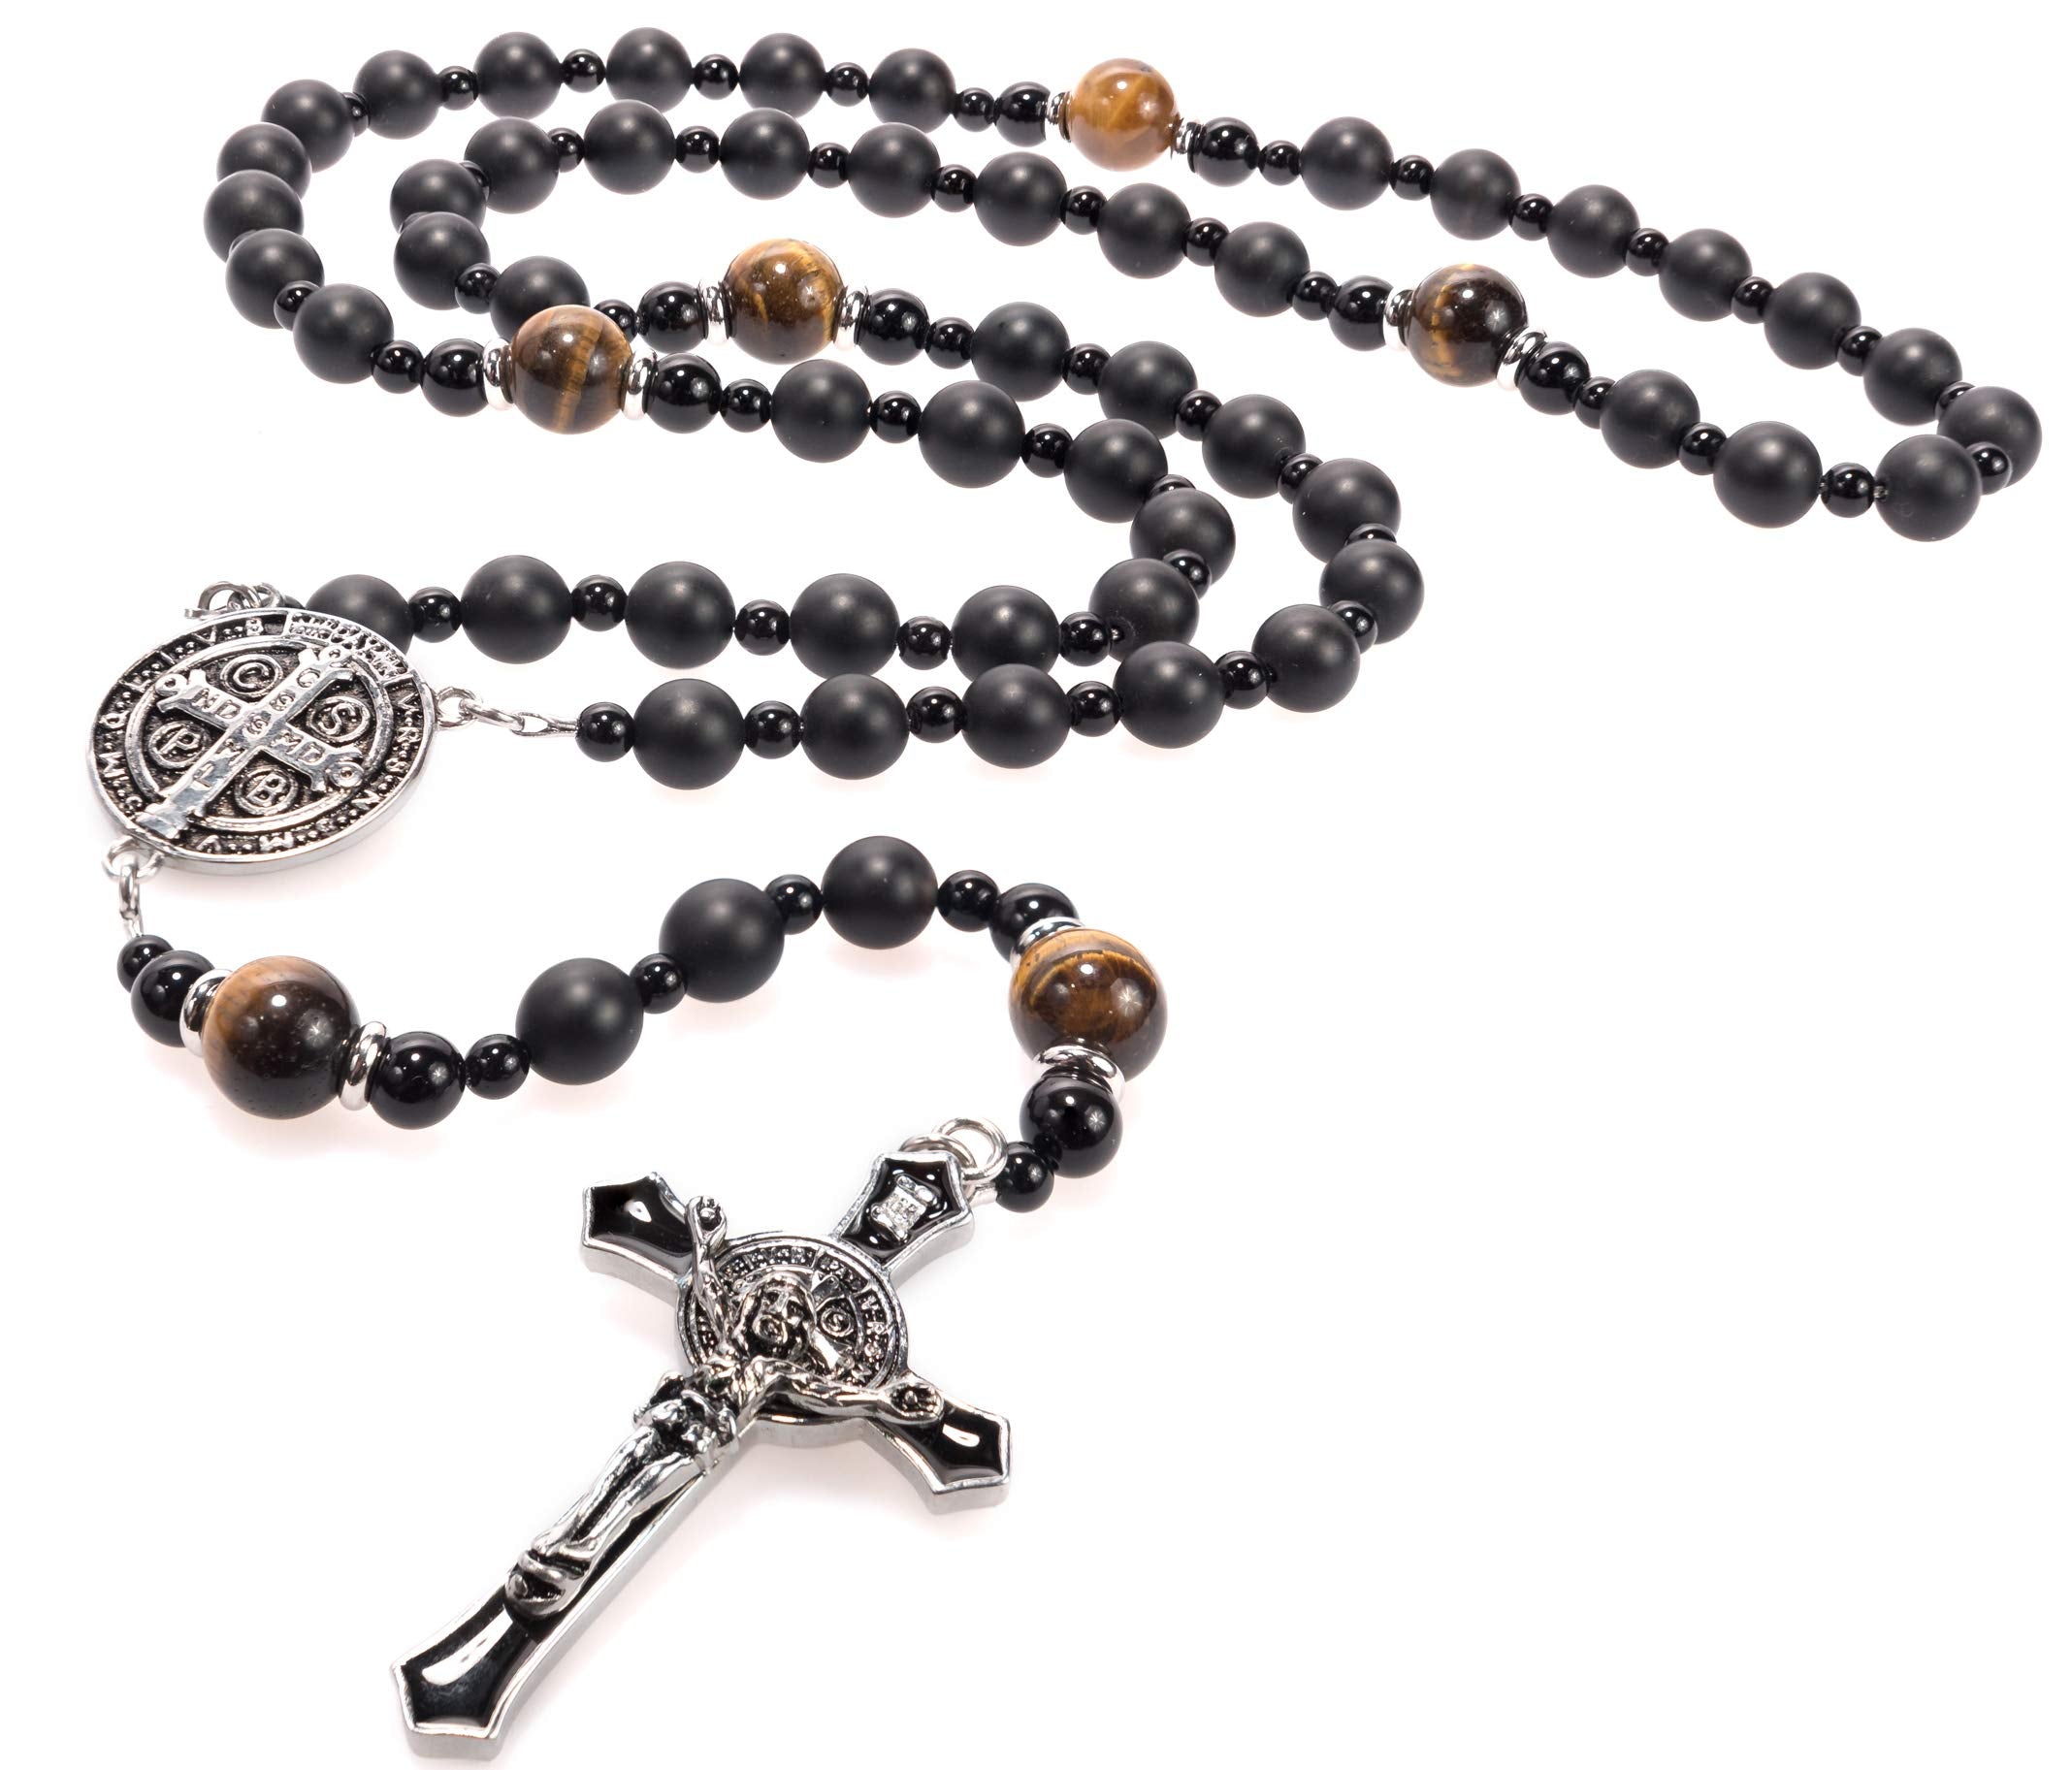 Black Rosary Beads Catholic for Men – Rugged Onyx Rosary – Handcrafted Stone Rosary with Stainless Steel St Benedict Crucifix and Medal…